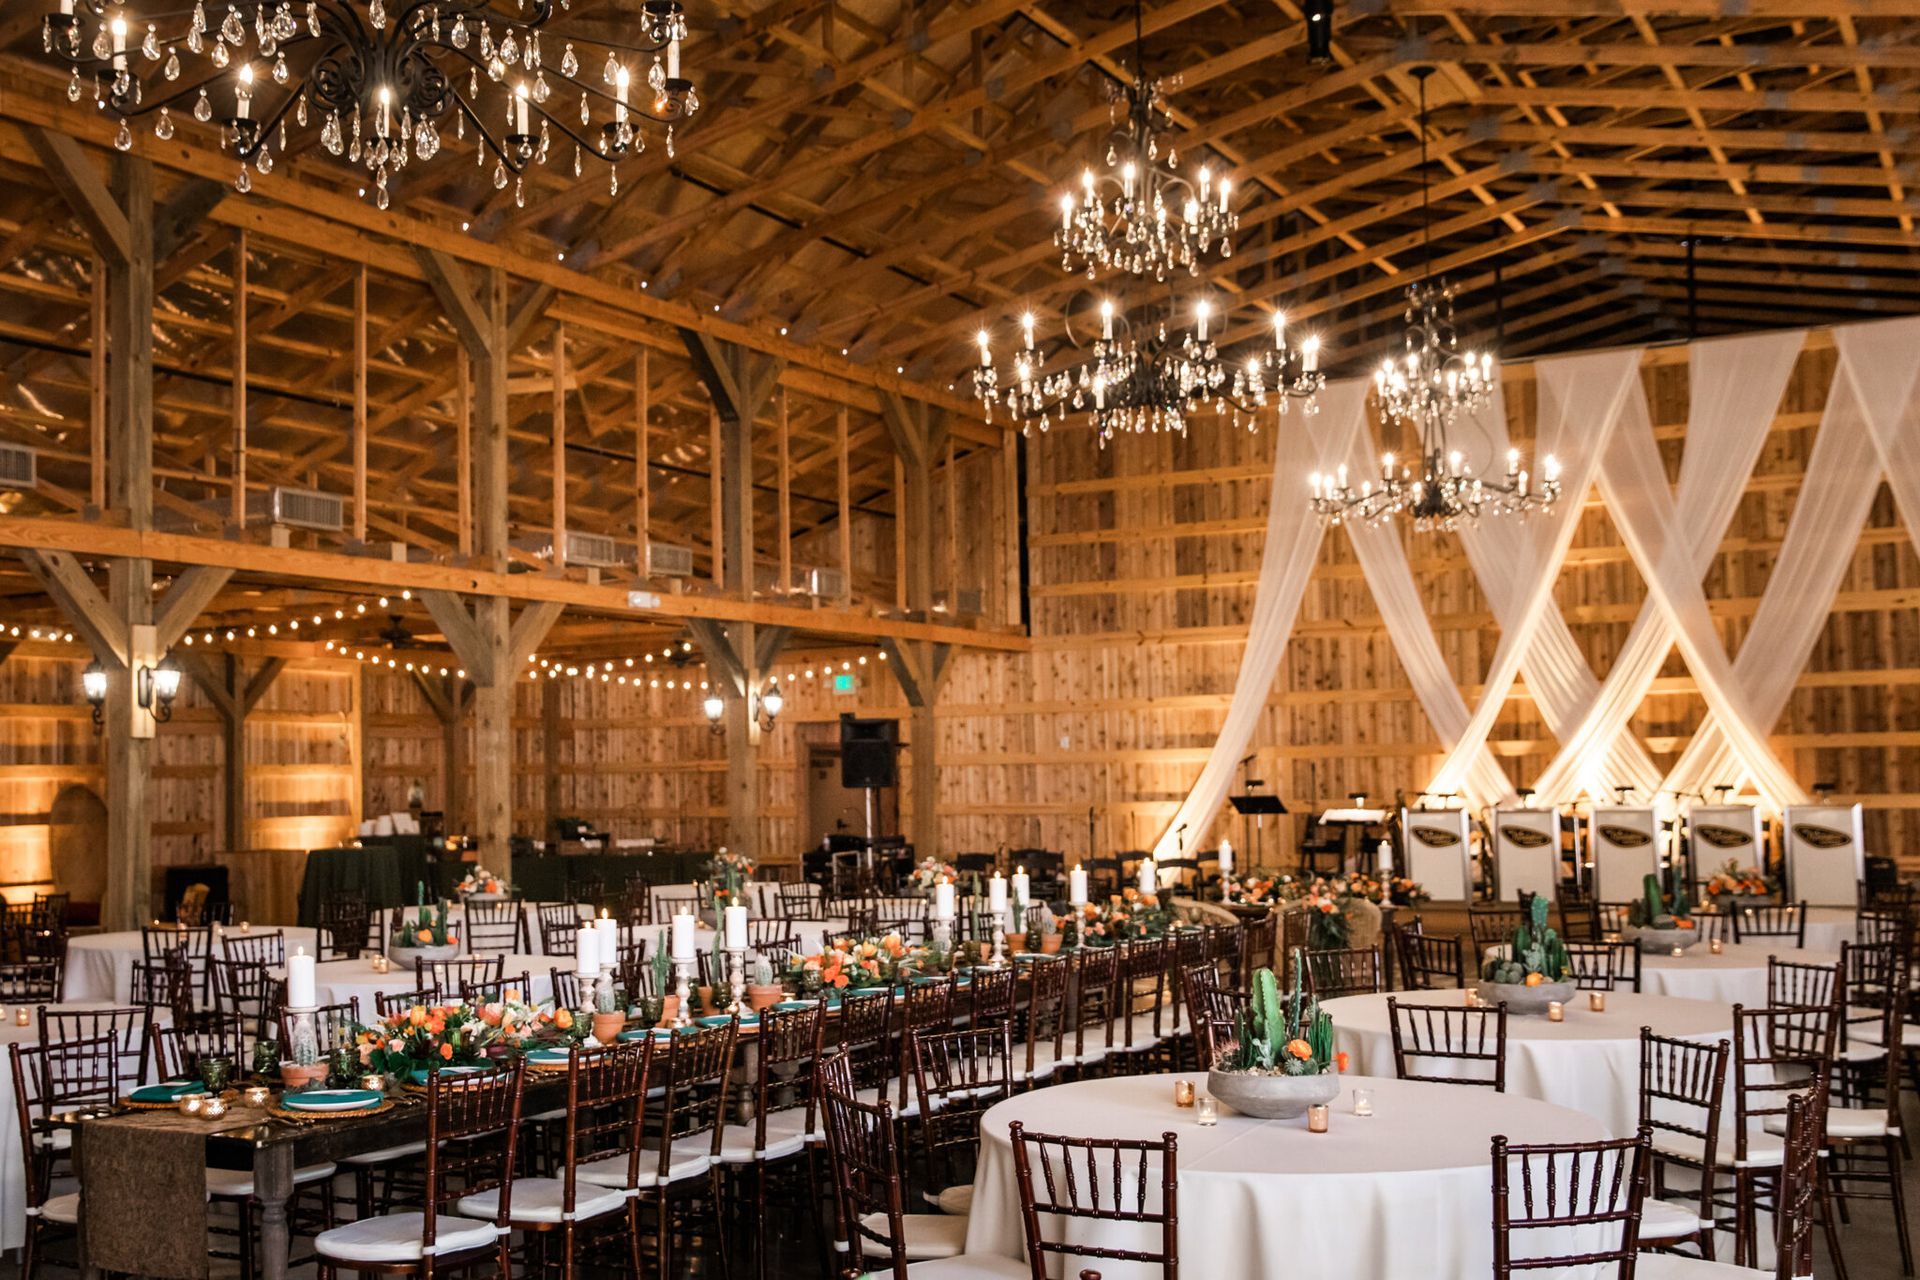 Emily and Jared’s Wedding, large barn filled with tables and chairs for a wedding reception by Wedding Planner Nashville